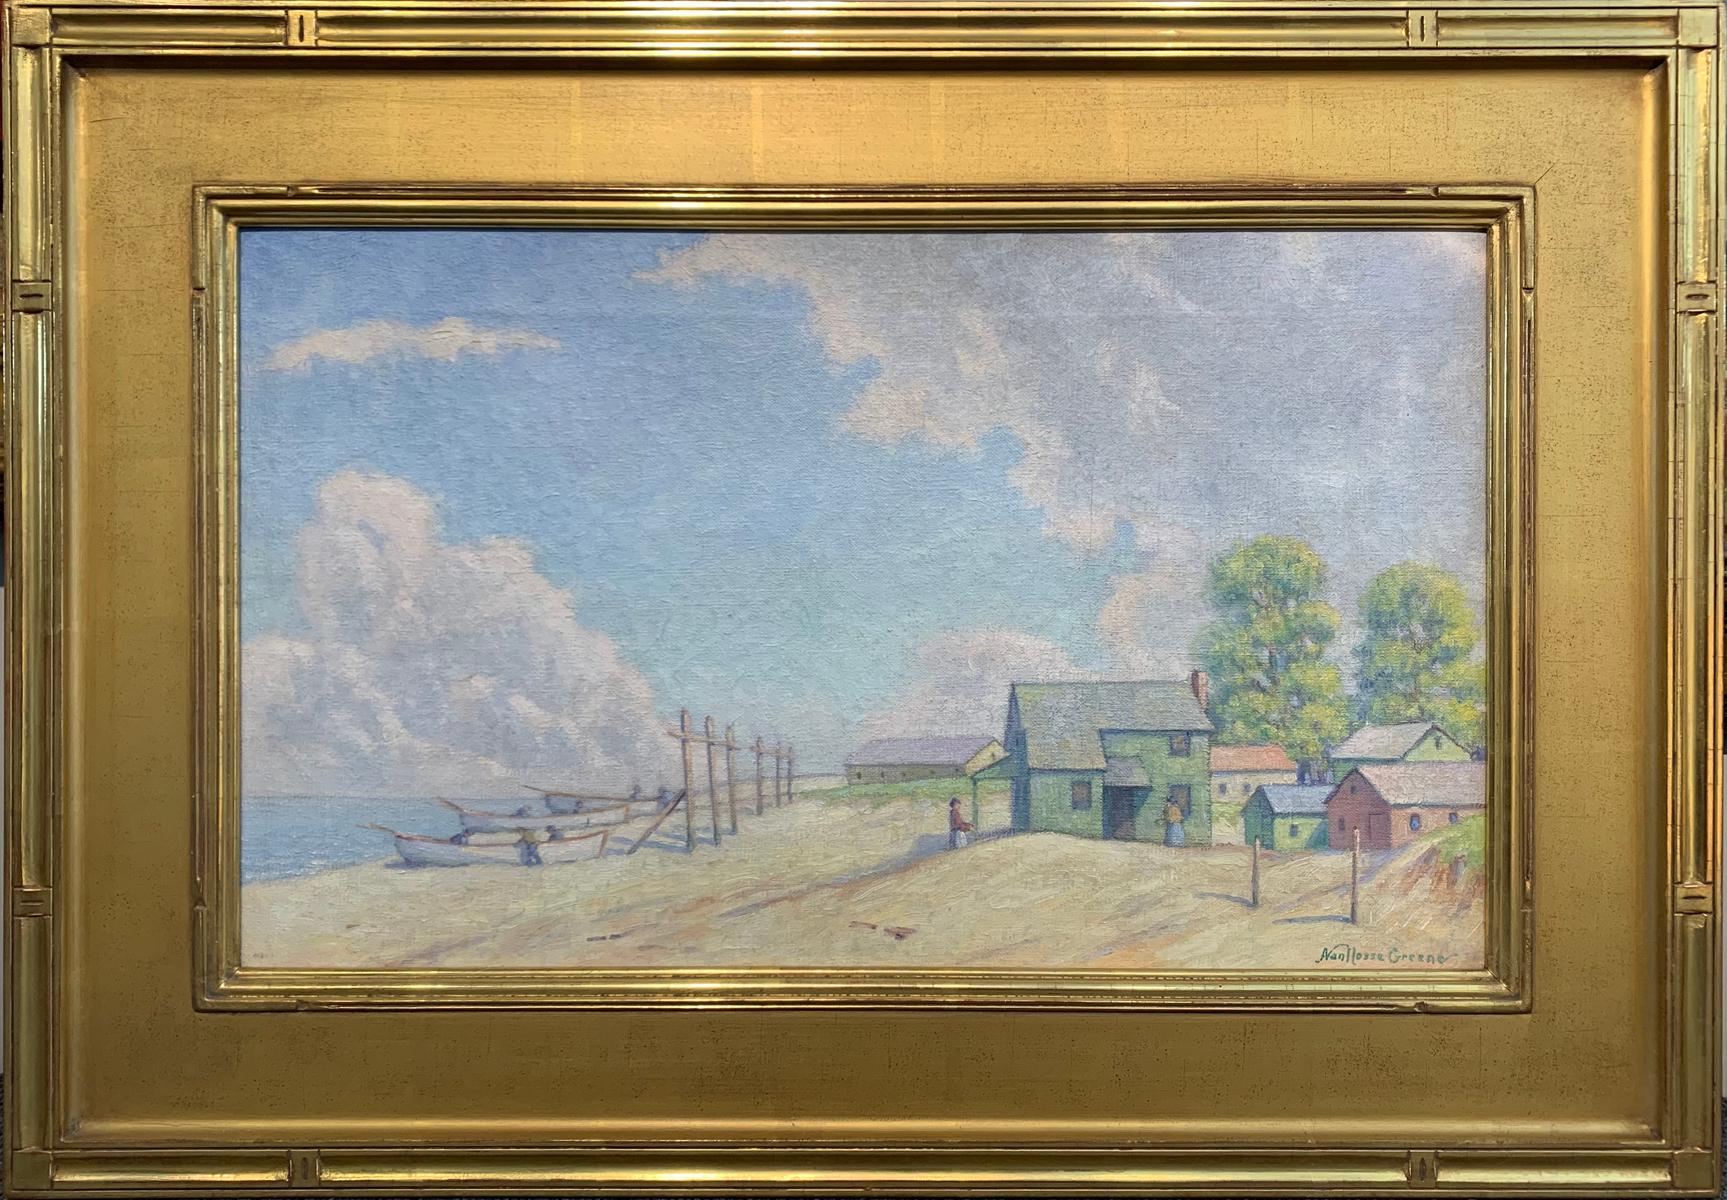 Albert Van Nesse Greene Landscape Painting - Figures, Boats, and House - Cape May Point, NJ, Impressionist Beach Scene, 1940s